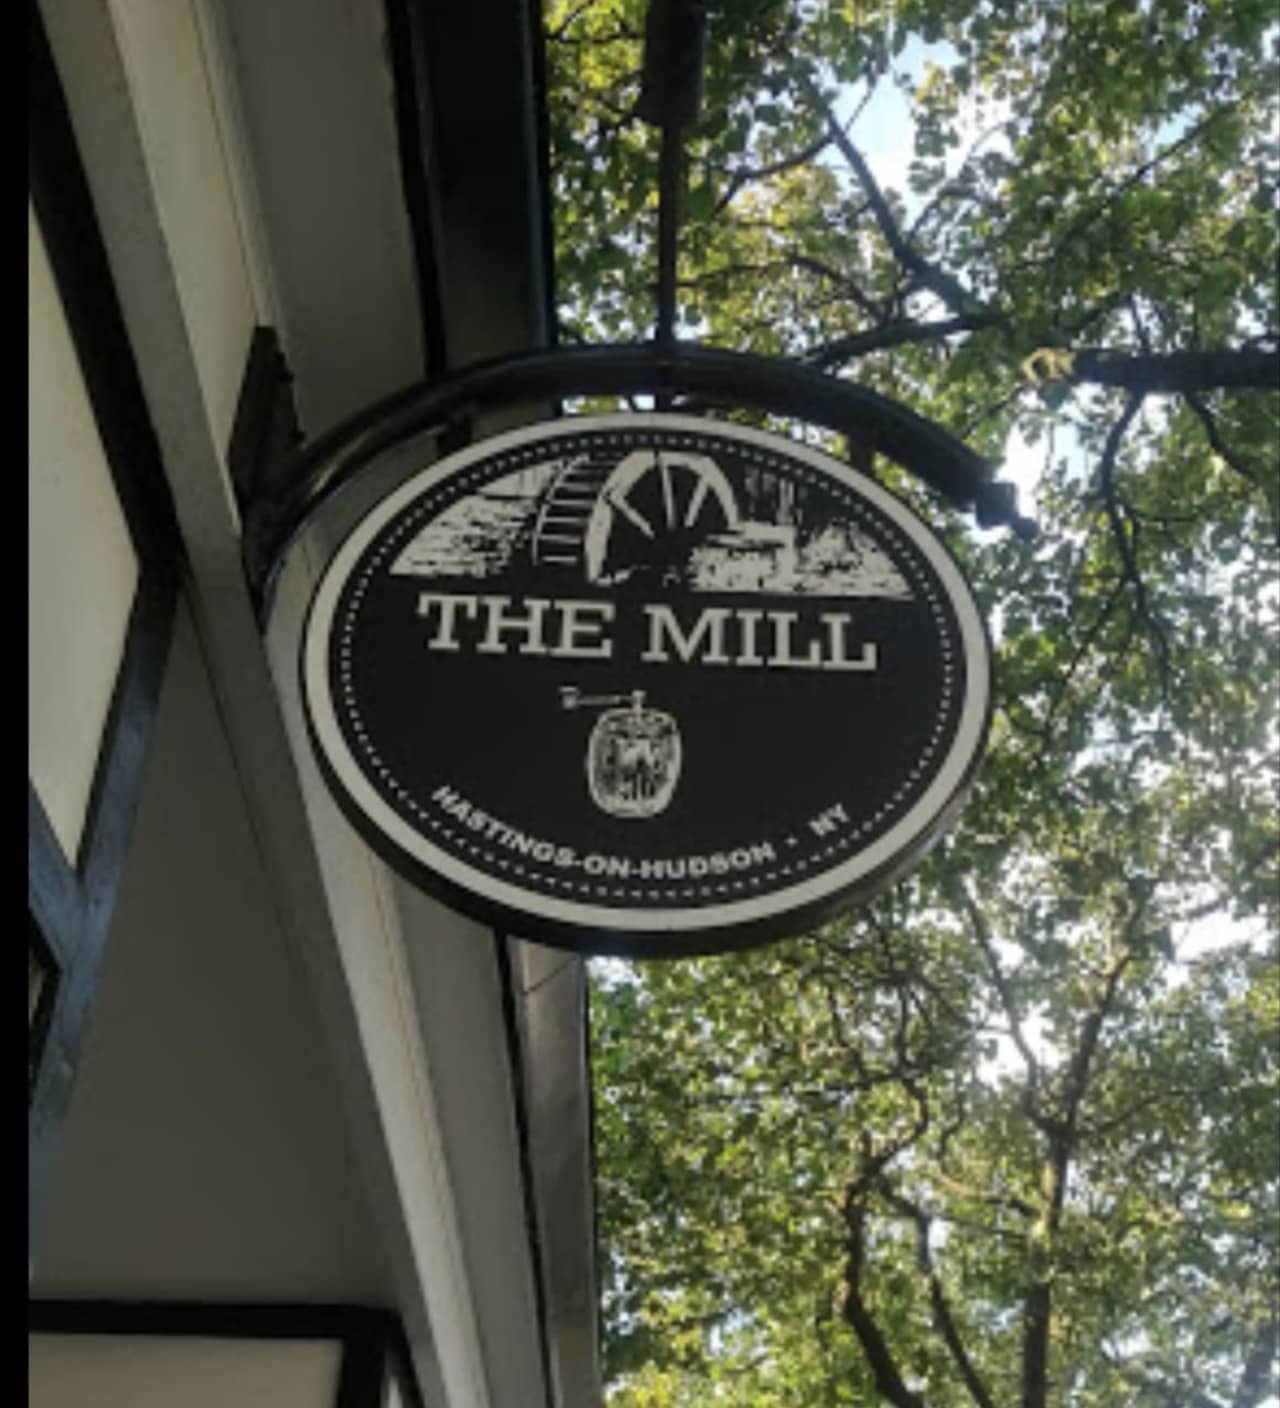 The Mill in Hasting-on-Hudson has closed its doors.